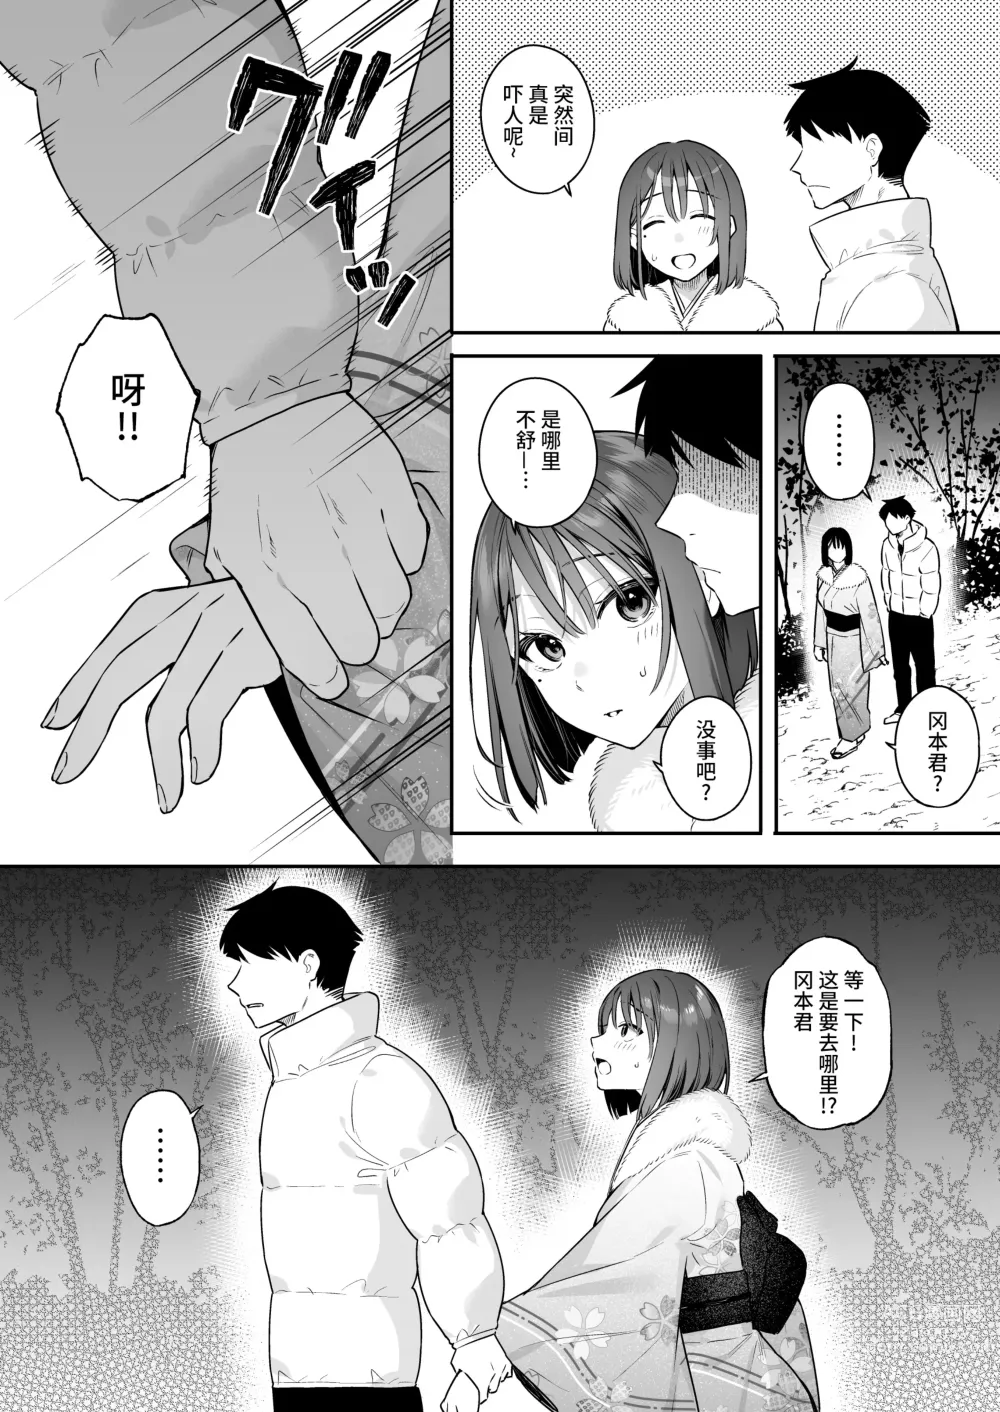 Page 12 of doujinshi 她的发情开关 2